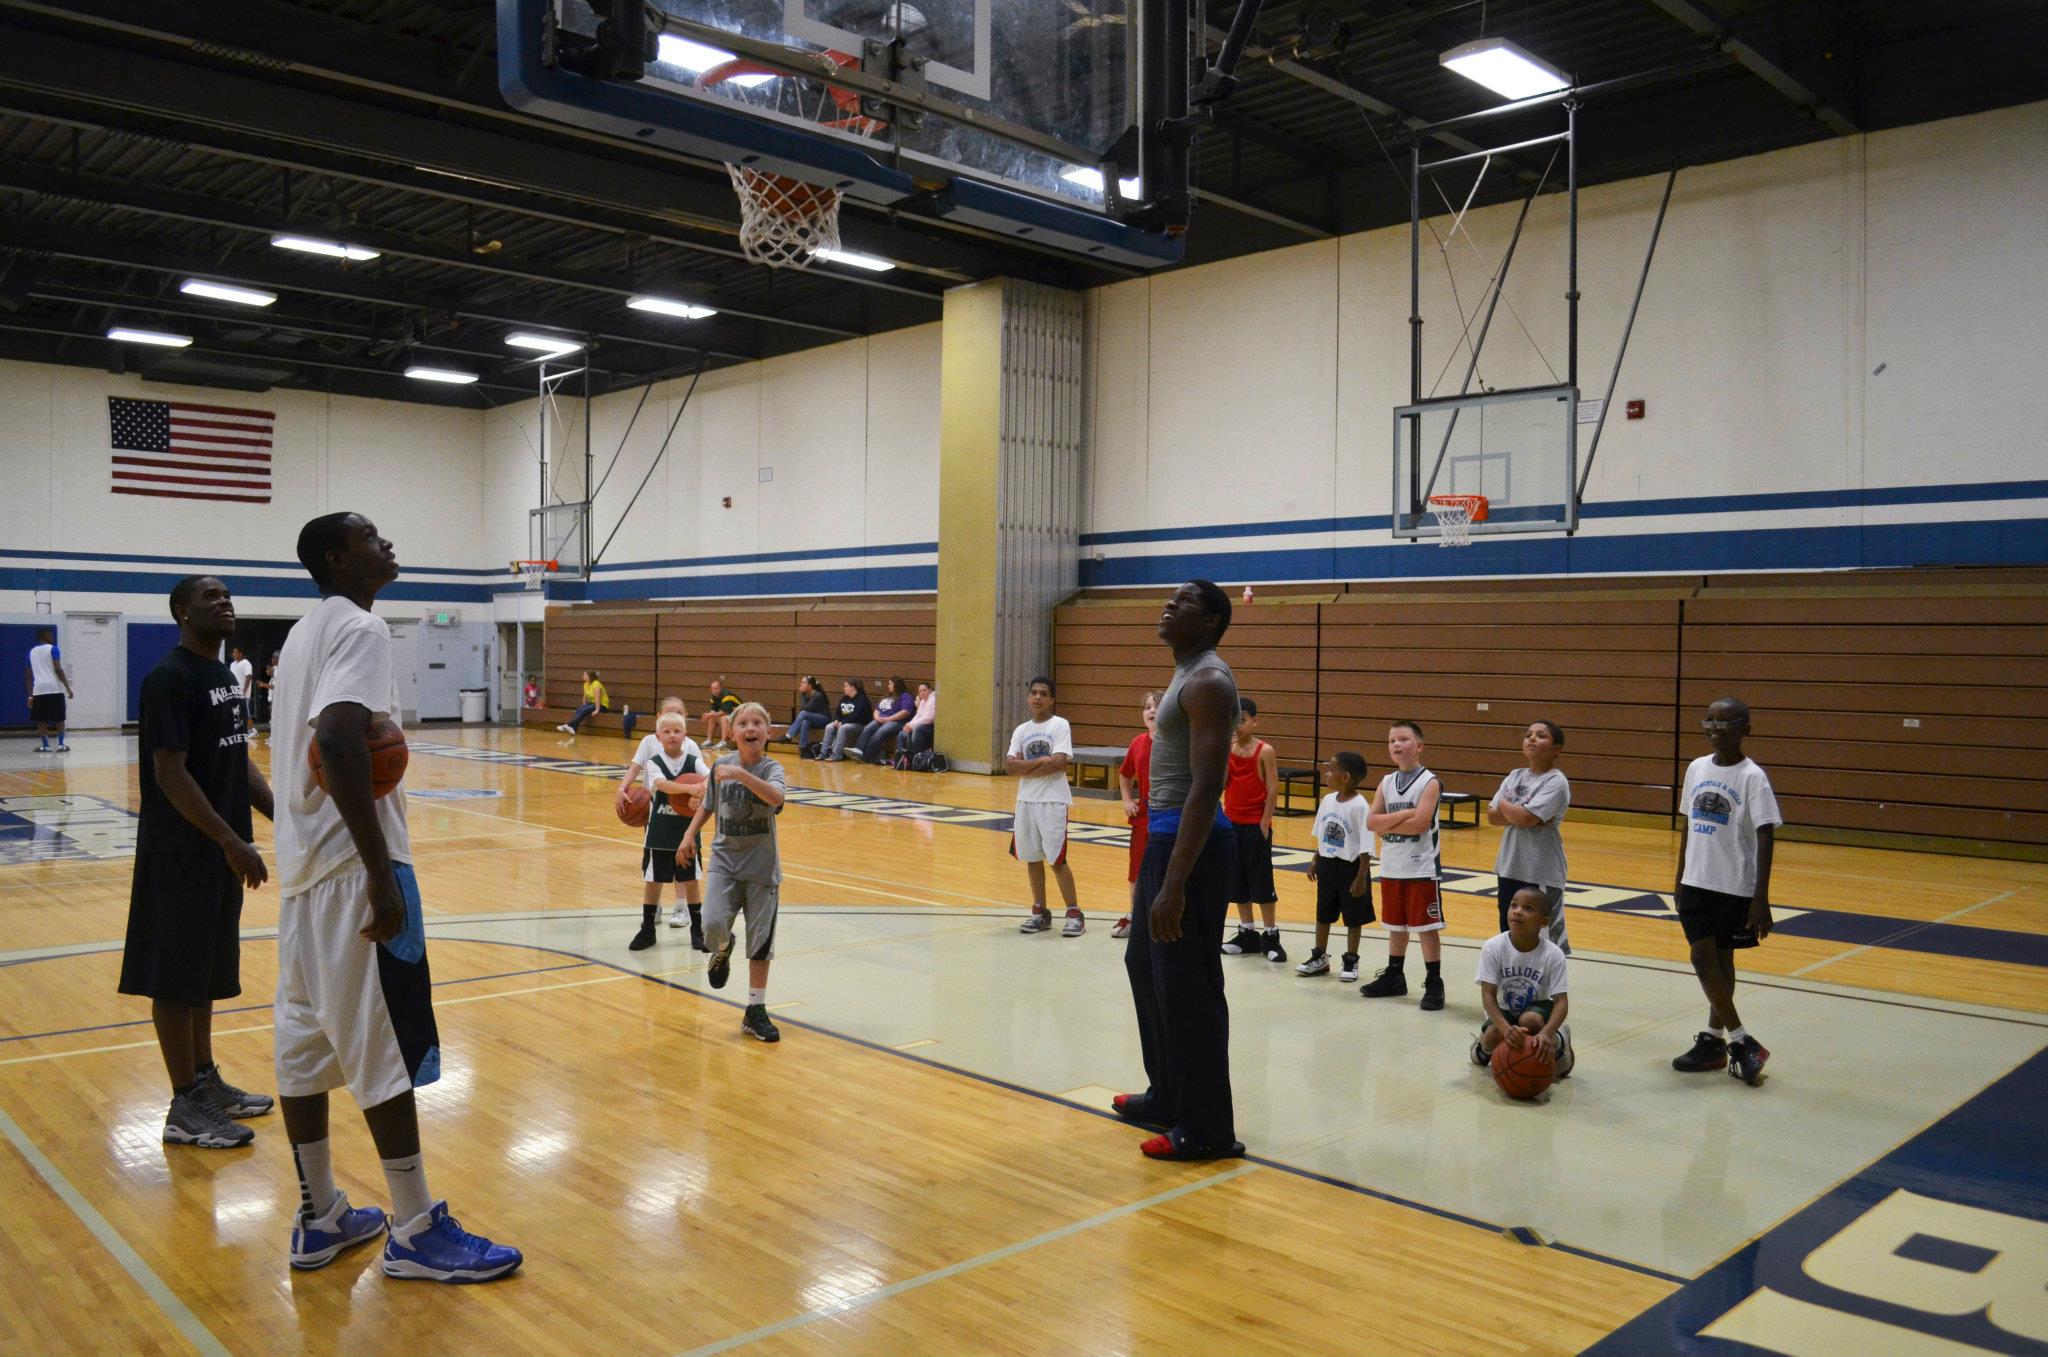 KCC basketball hosting Summer Basketball Camp for youth - KCC Daily